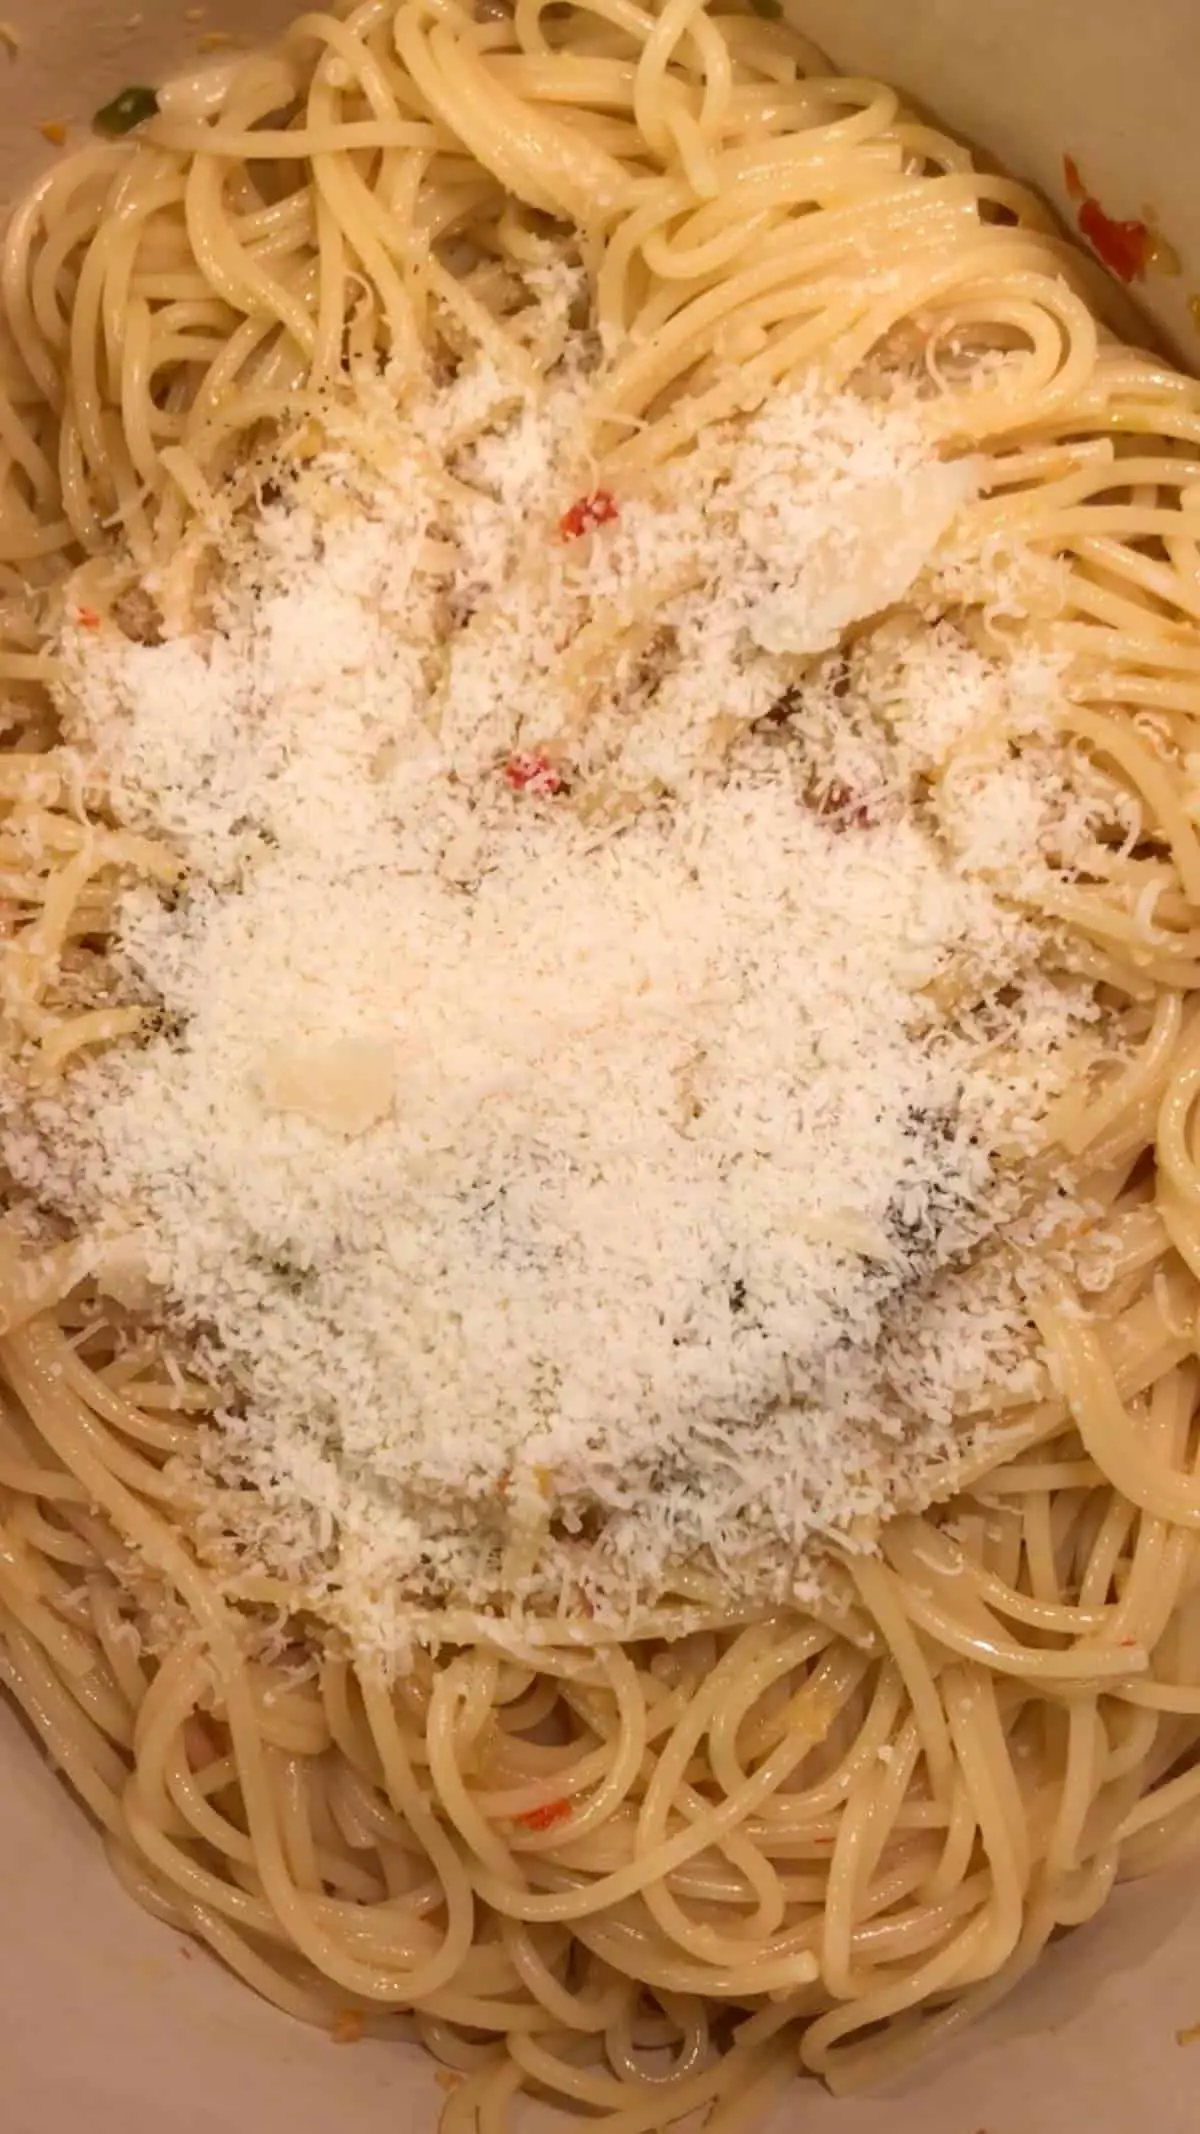 Spaghetti in a dutch oven with grated Parmesan cheese on top of the spaghetti.